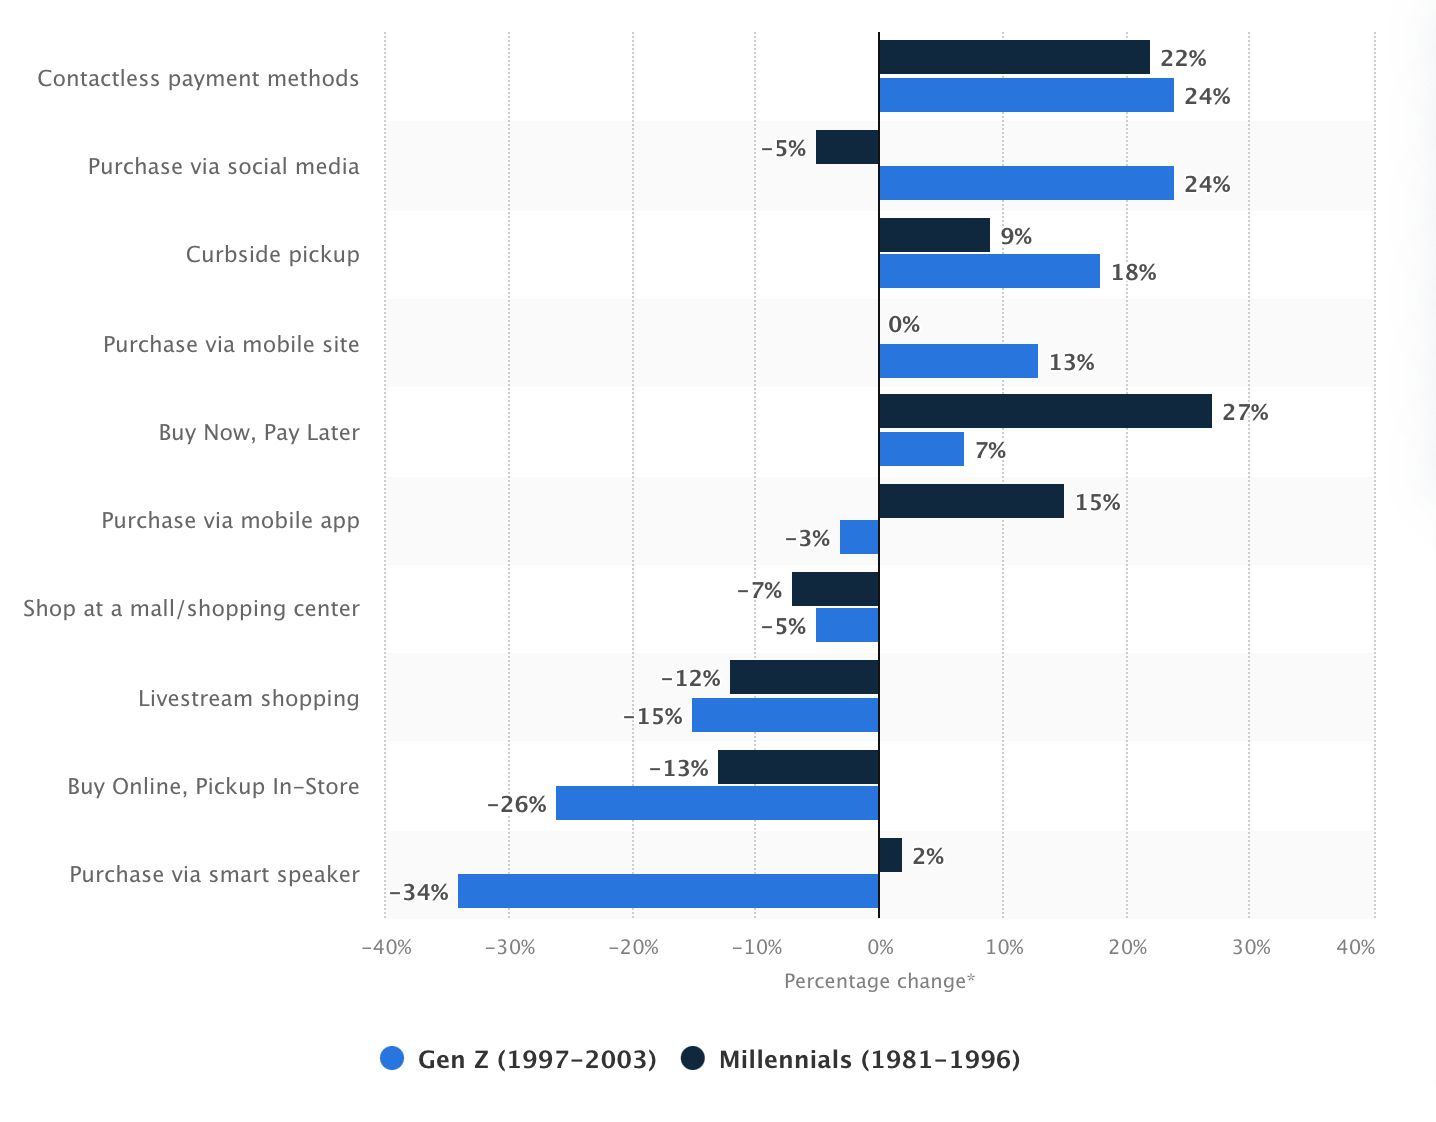 The future of ecommerce payments: The graph looks at the payment methods millennials and Gen Z’s are most likely to adopt